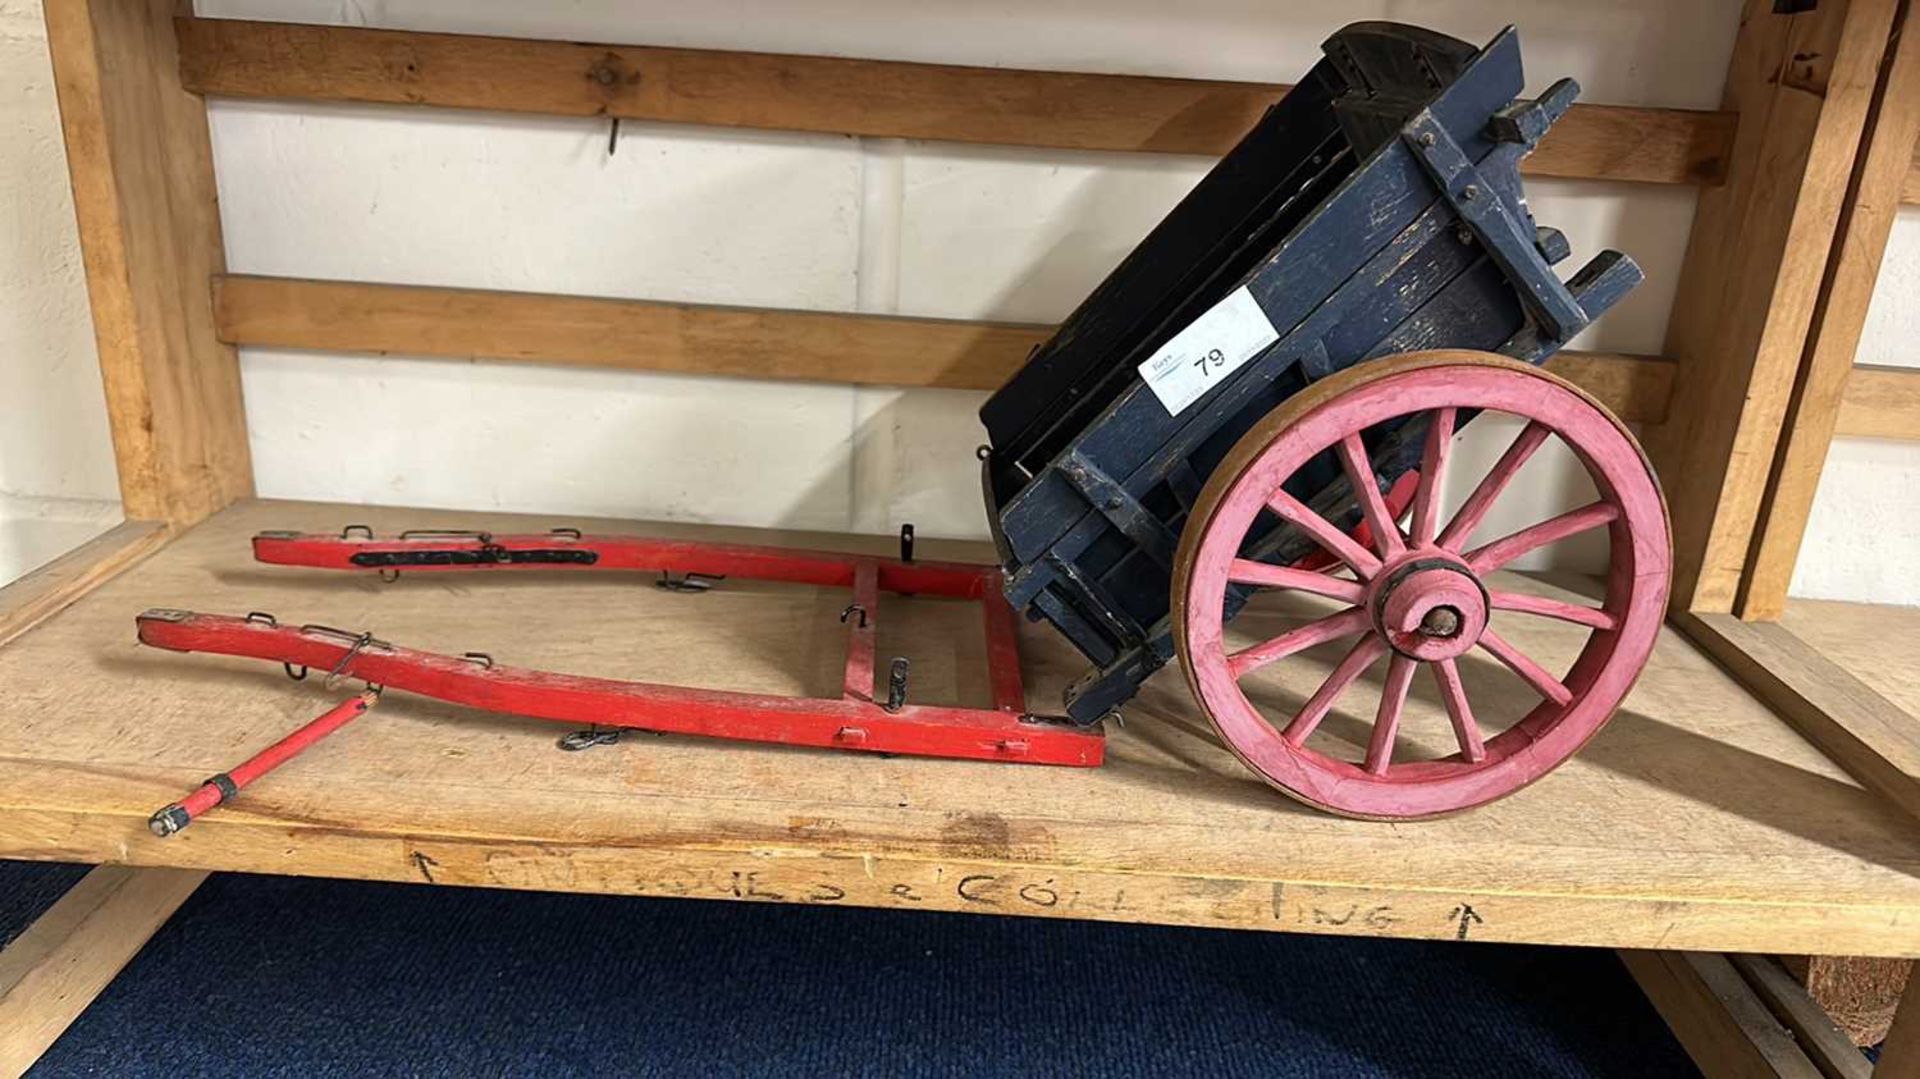 A scratch built model of a single axle cart painted in red and blue, approx 50cm long